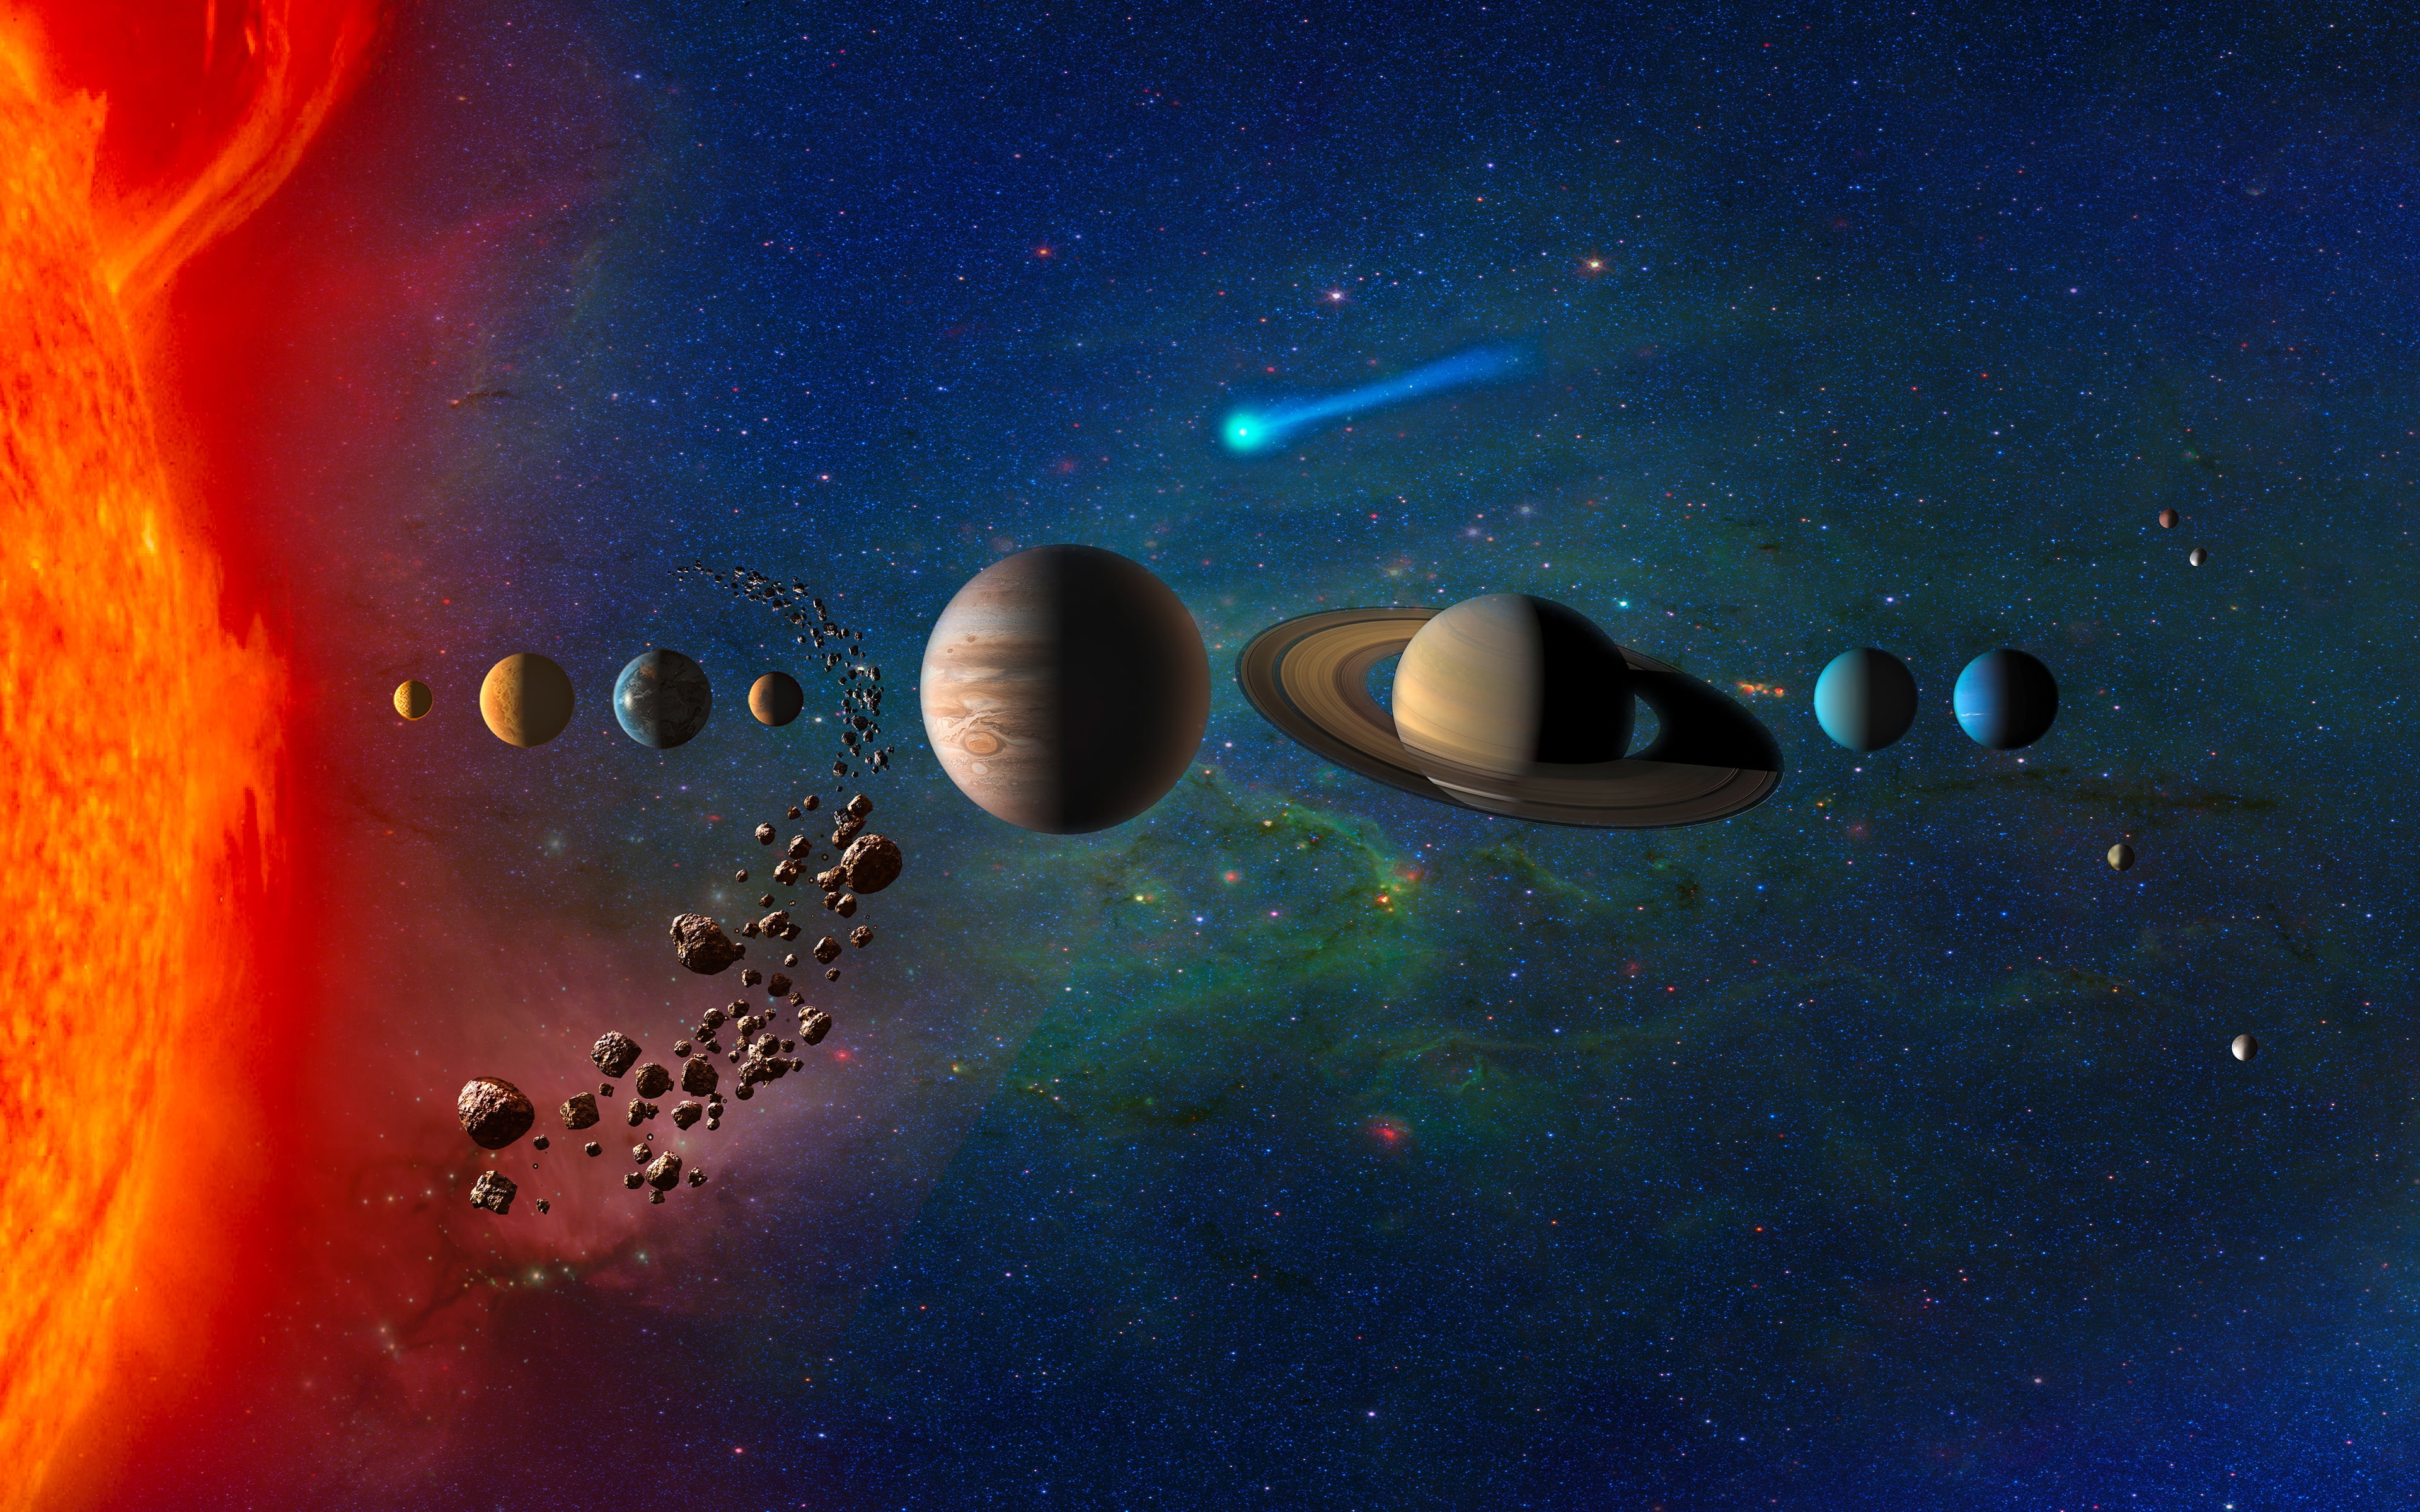 Solar System, planet, Saturn, stars, asteroids, comet, Earth